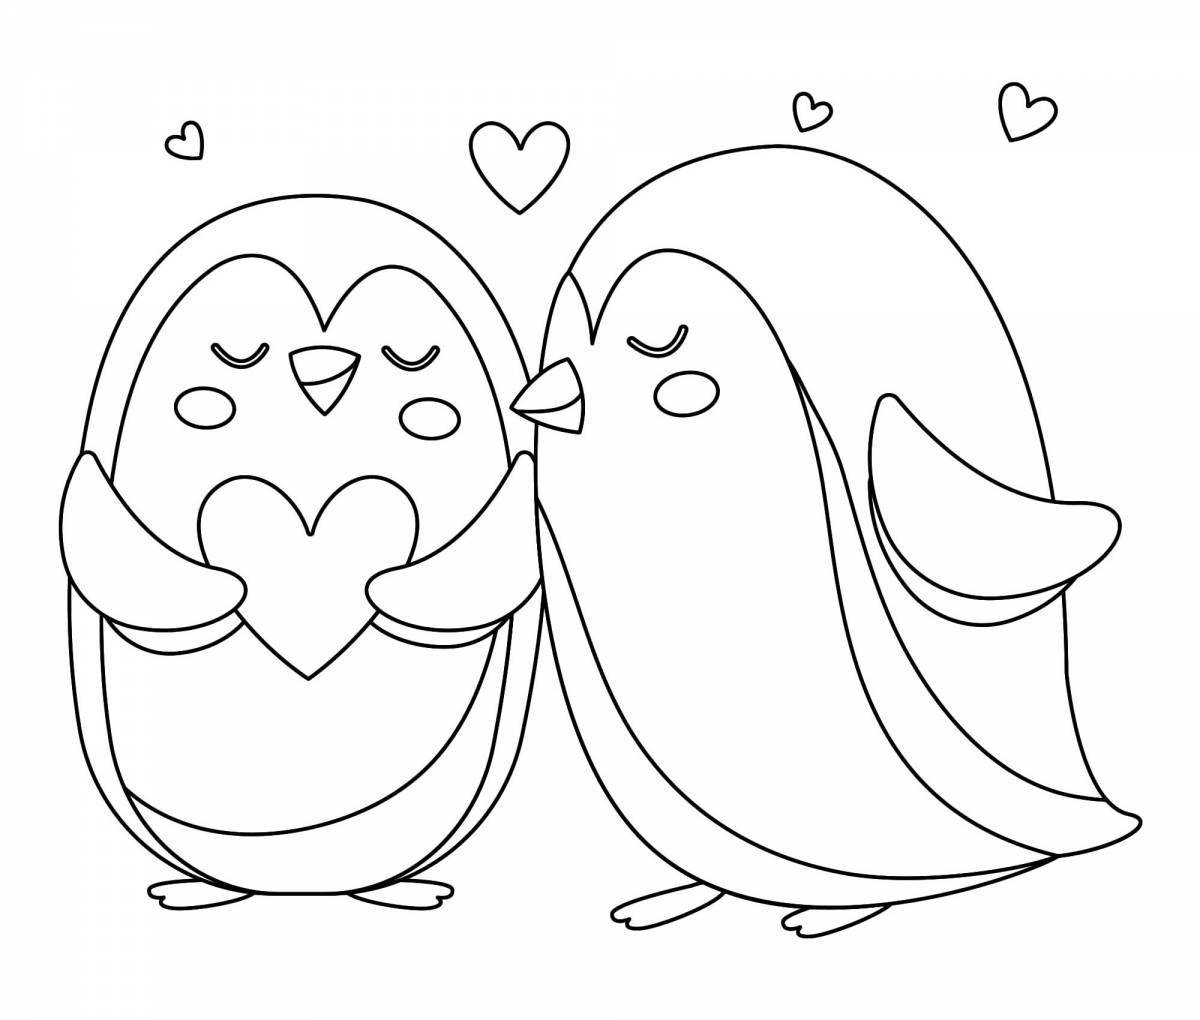 Cosy penguin family coloring page